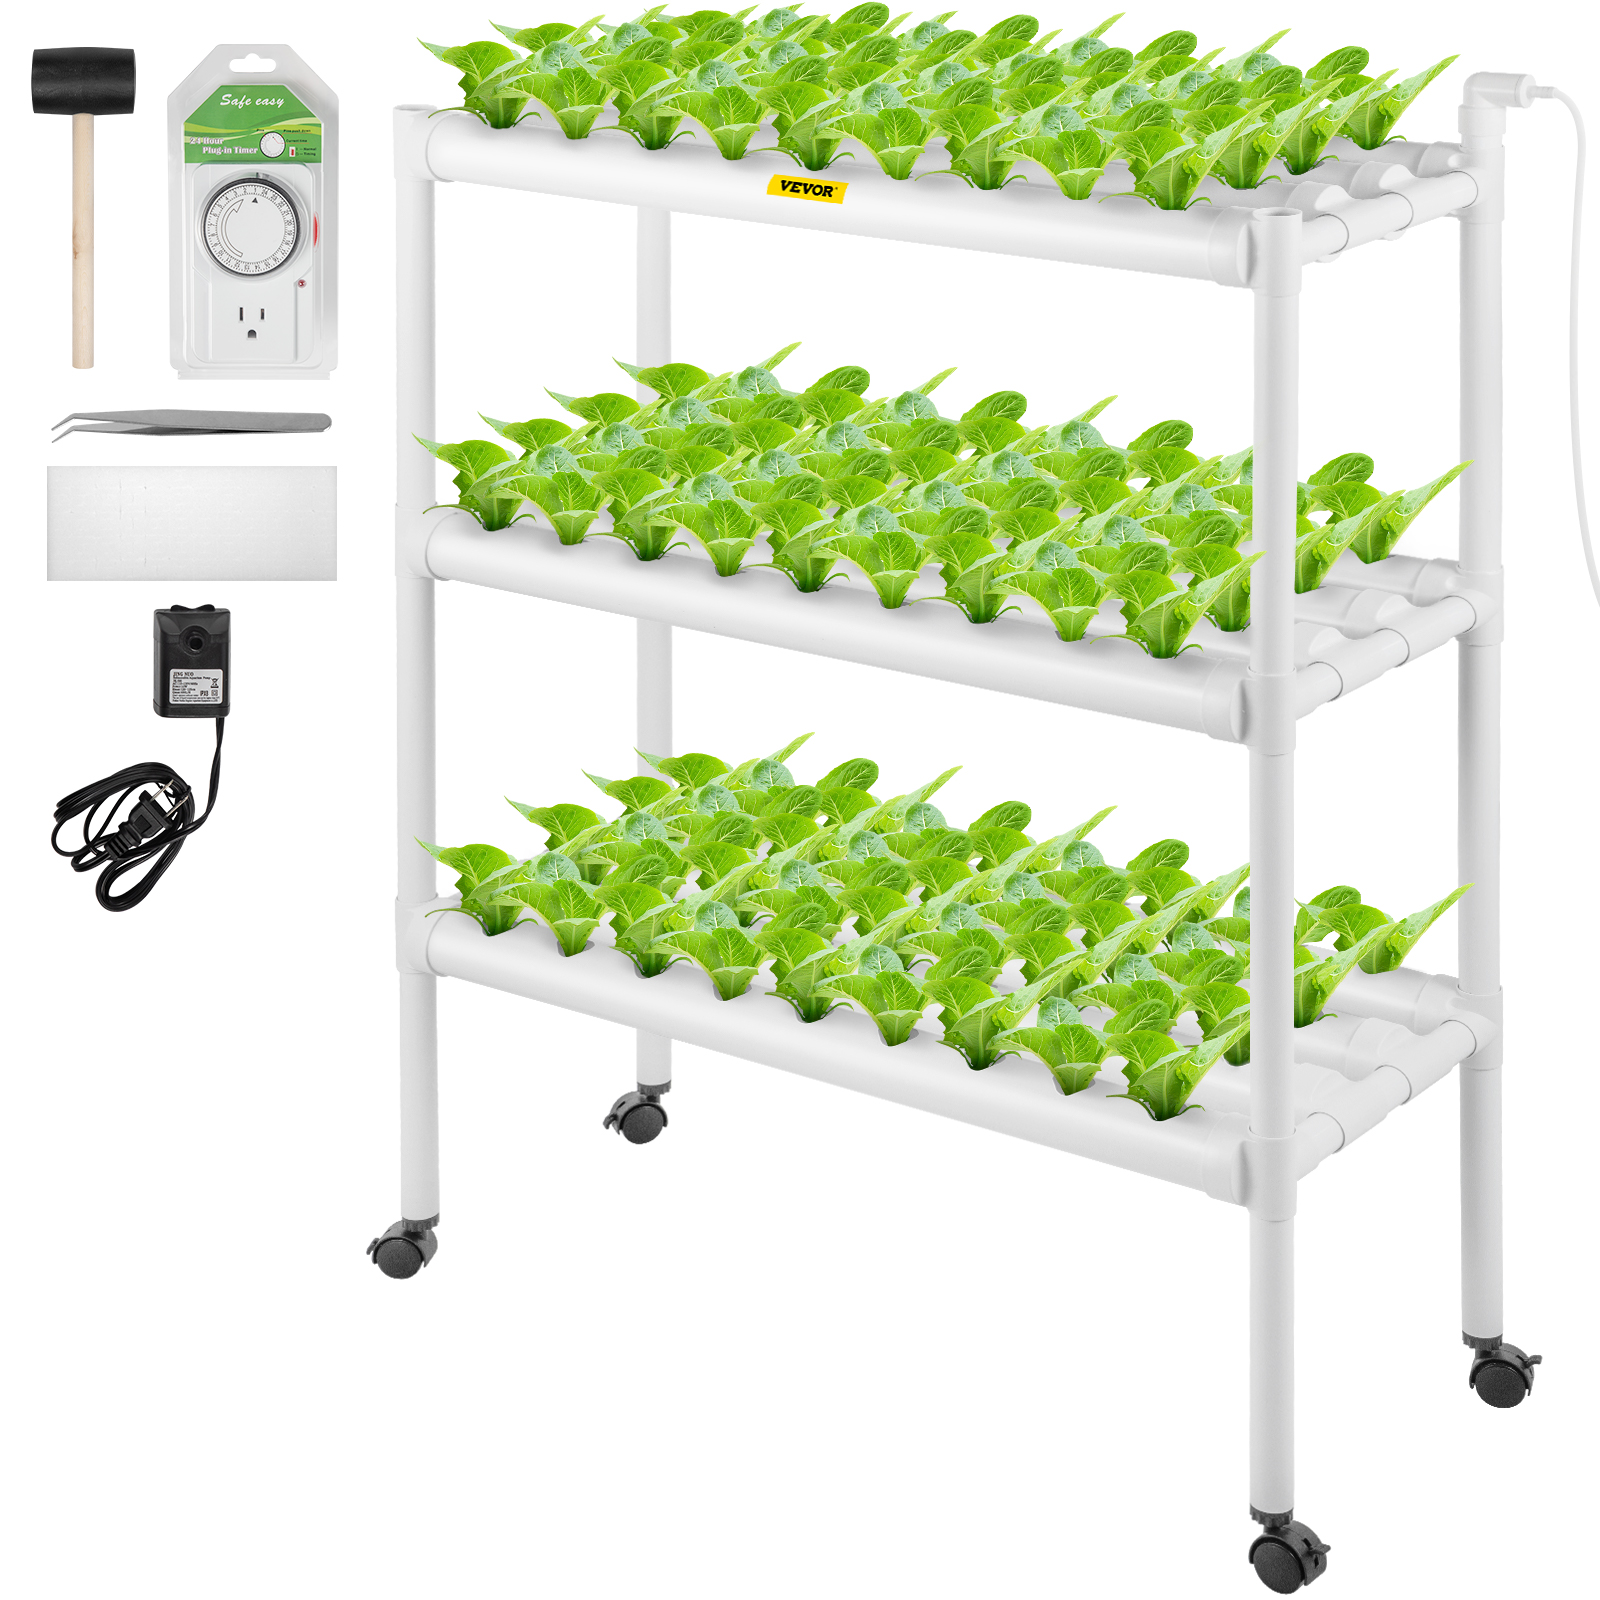 CA New 3-Layer Hydroponic Grow Kit 12 Pipes 108 Plant Site Garden Vegetable Tool 